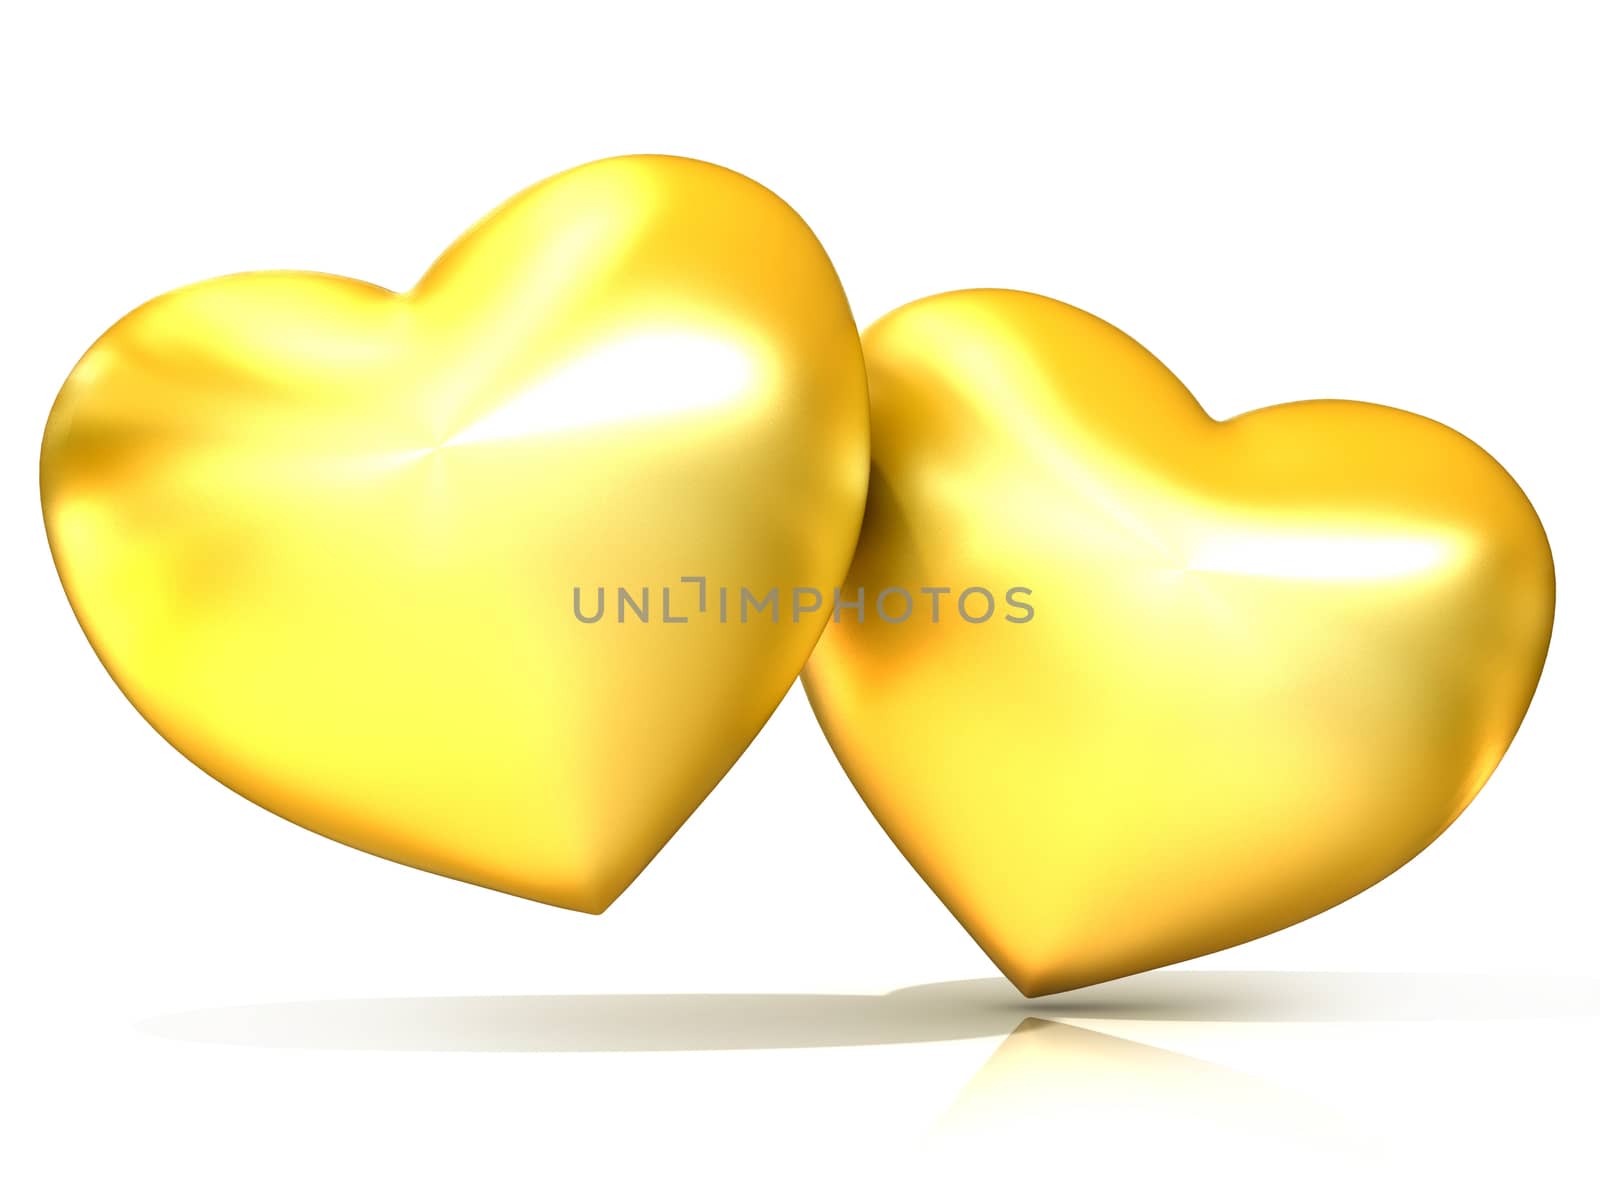 Two golden hearts. 3D render illustration isolated on white background